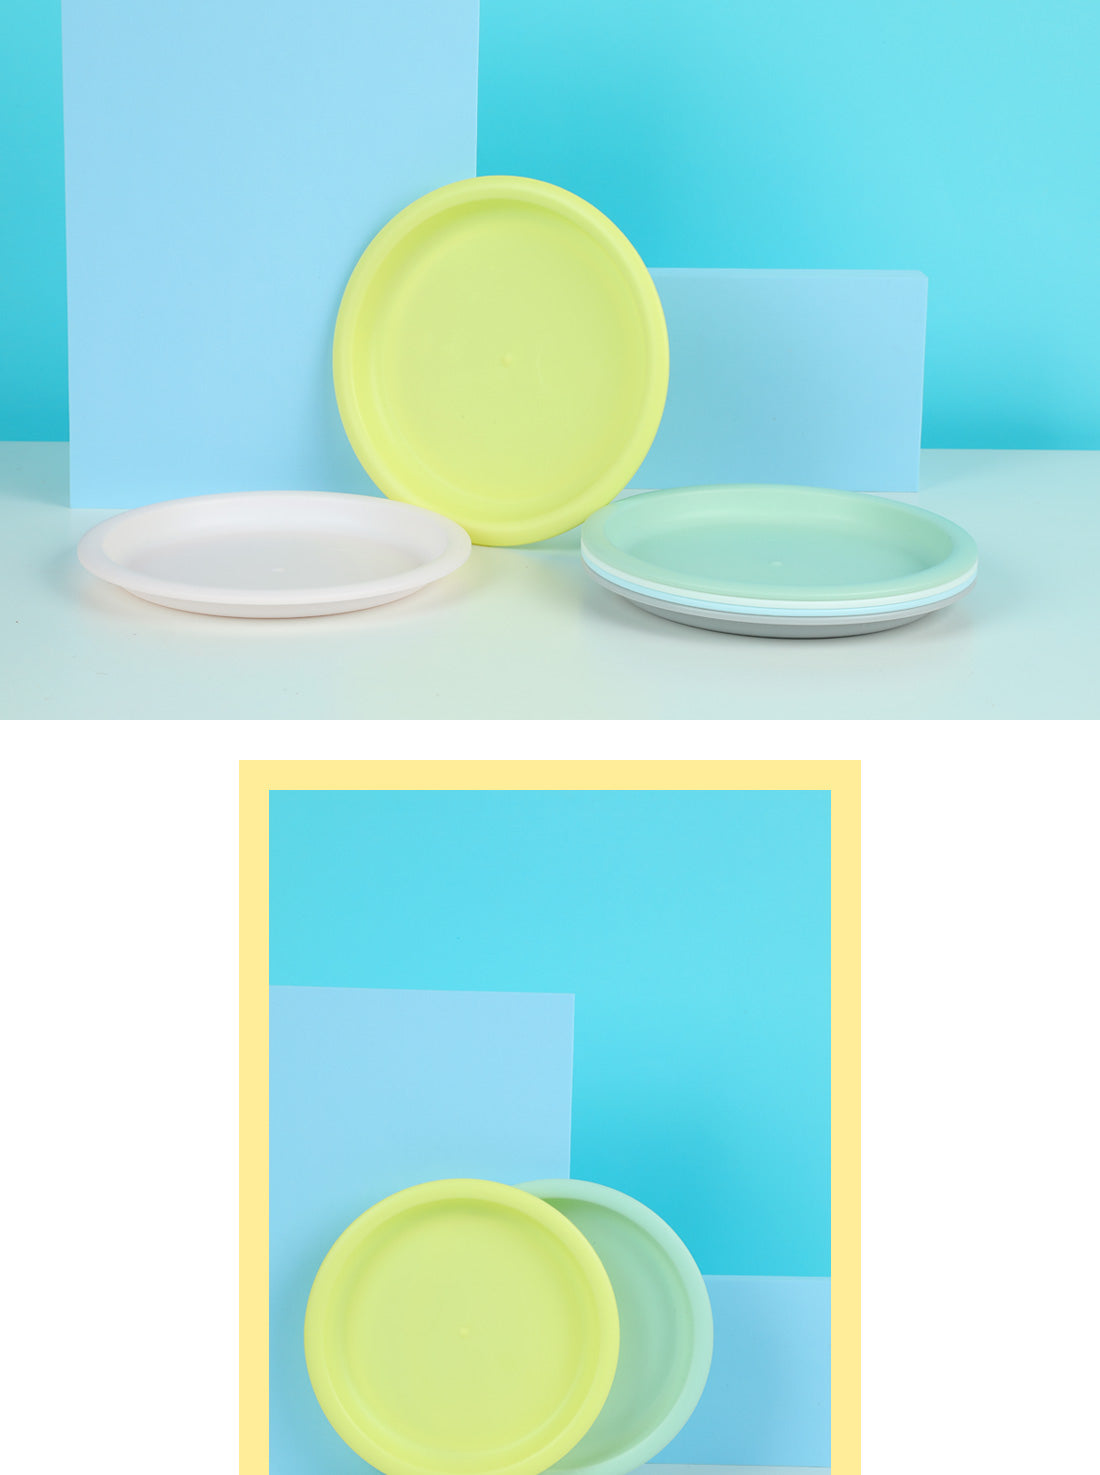 MINISO COLORFUL ECO-FRIENDLY PLATE 6 PACK 2006877610104 BOWL/PLATE/DISH